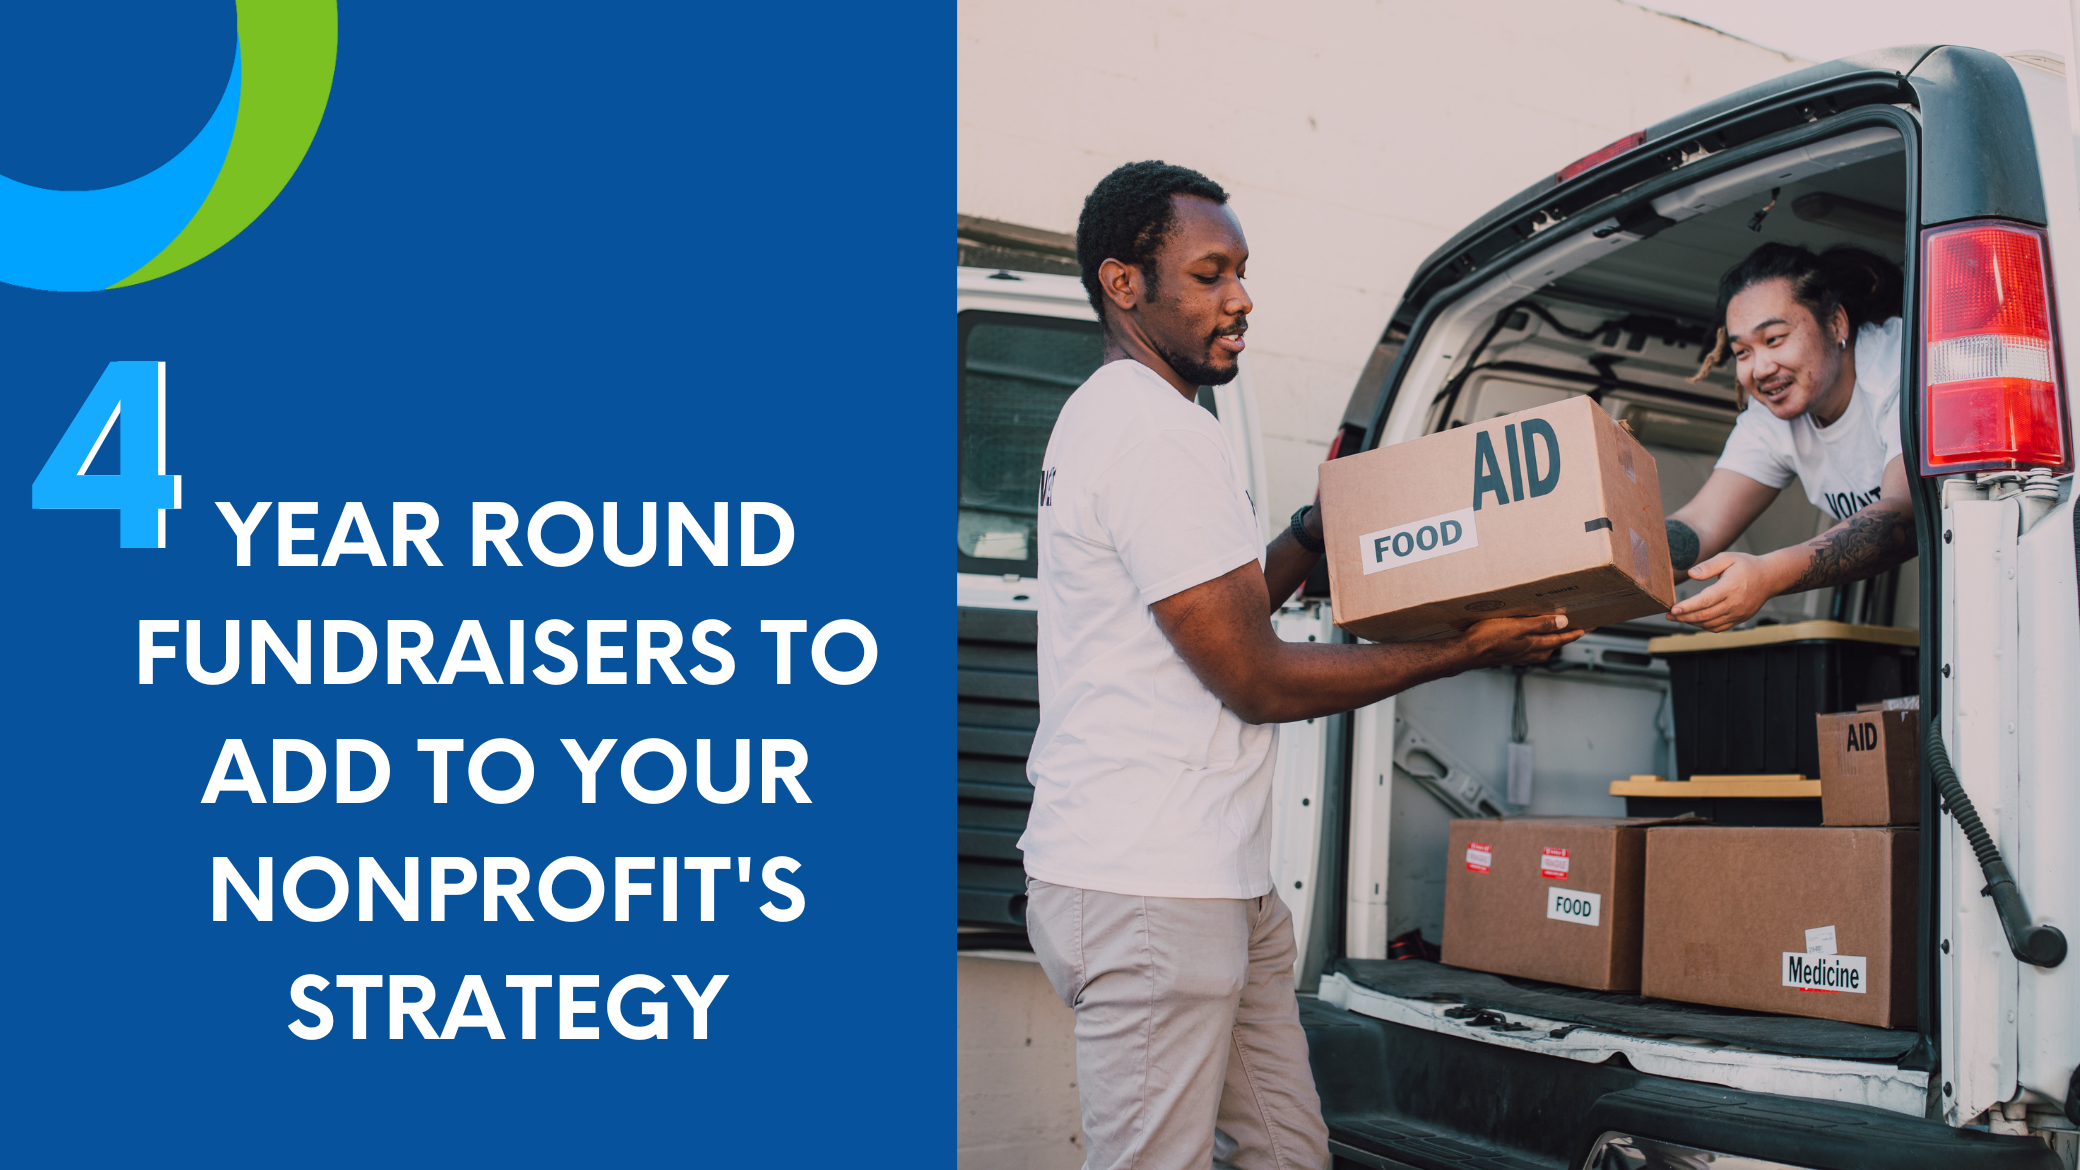 4 Year-Round Fundraisers to Add to Your Nonprofit’s Strategy